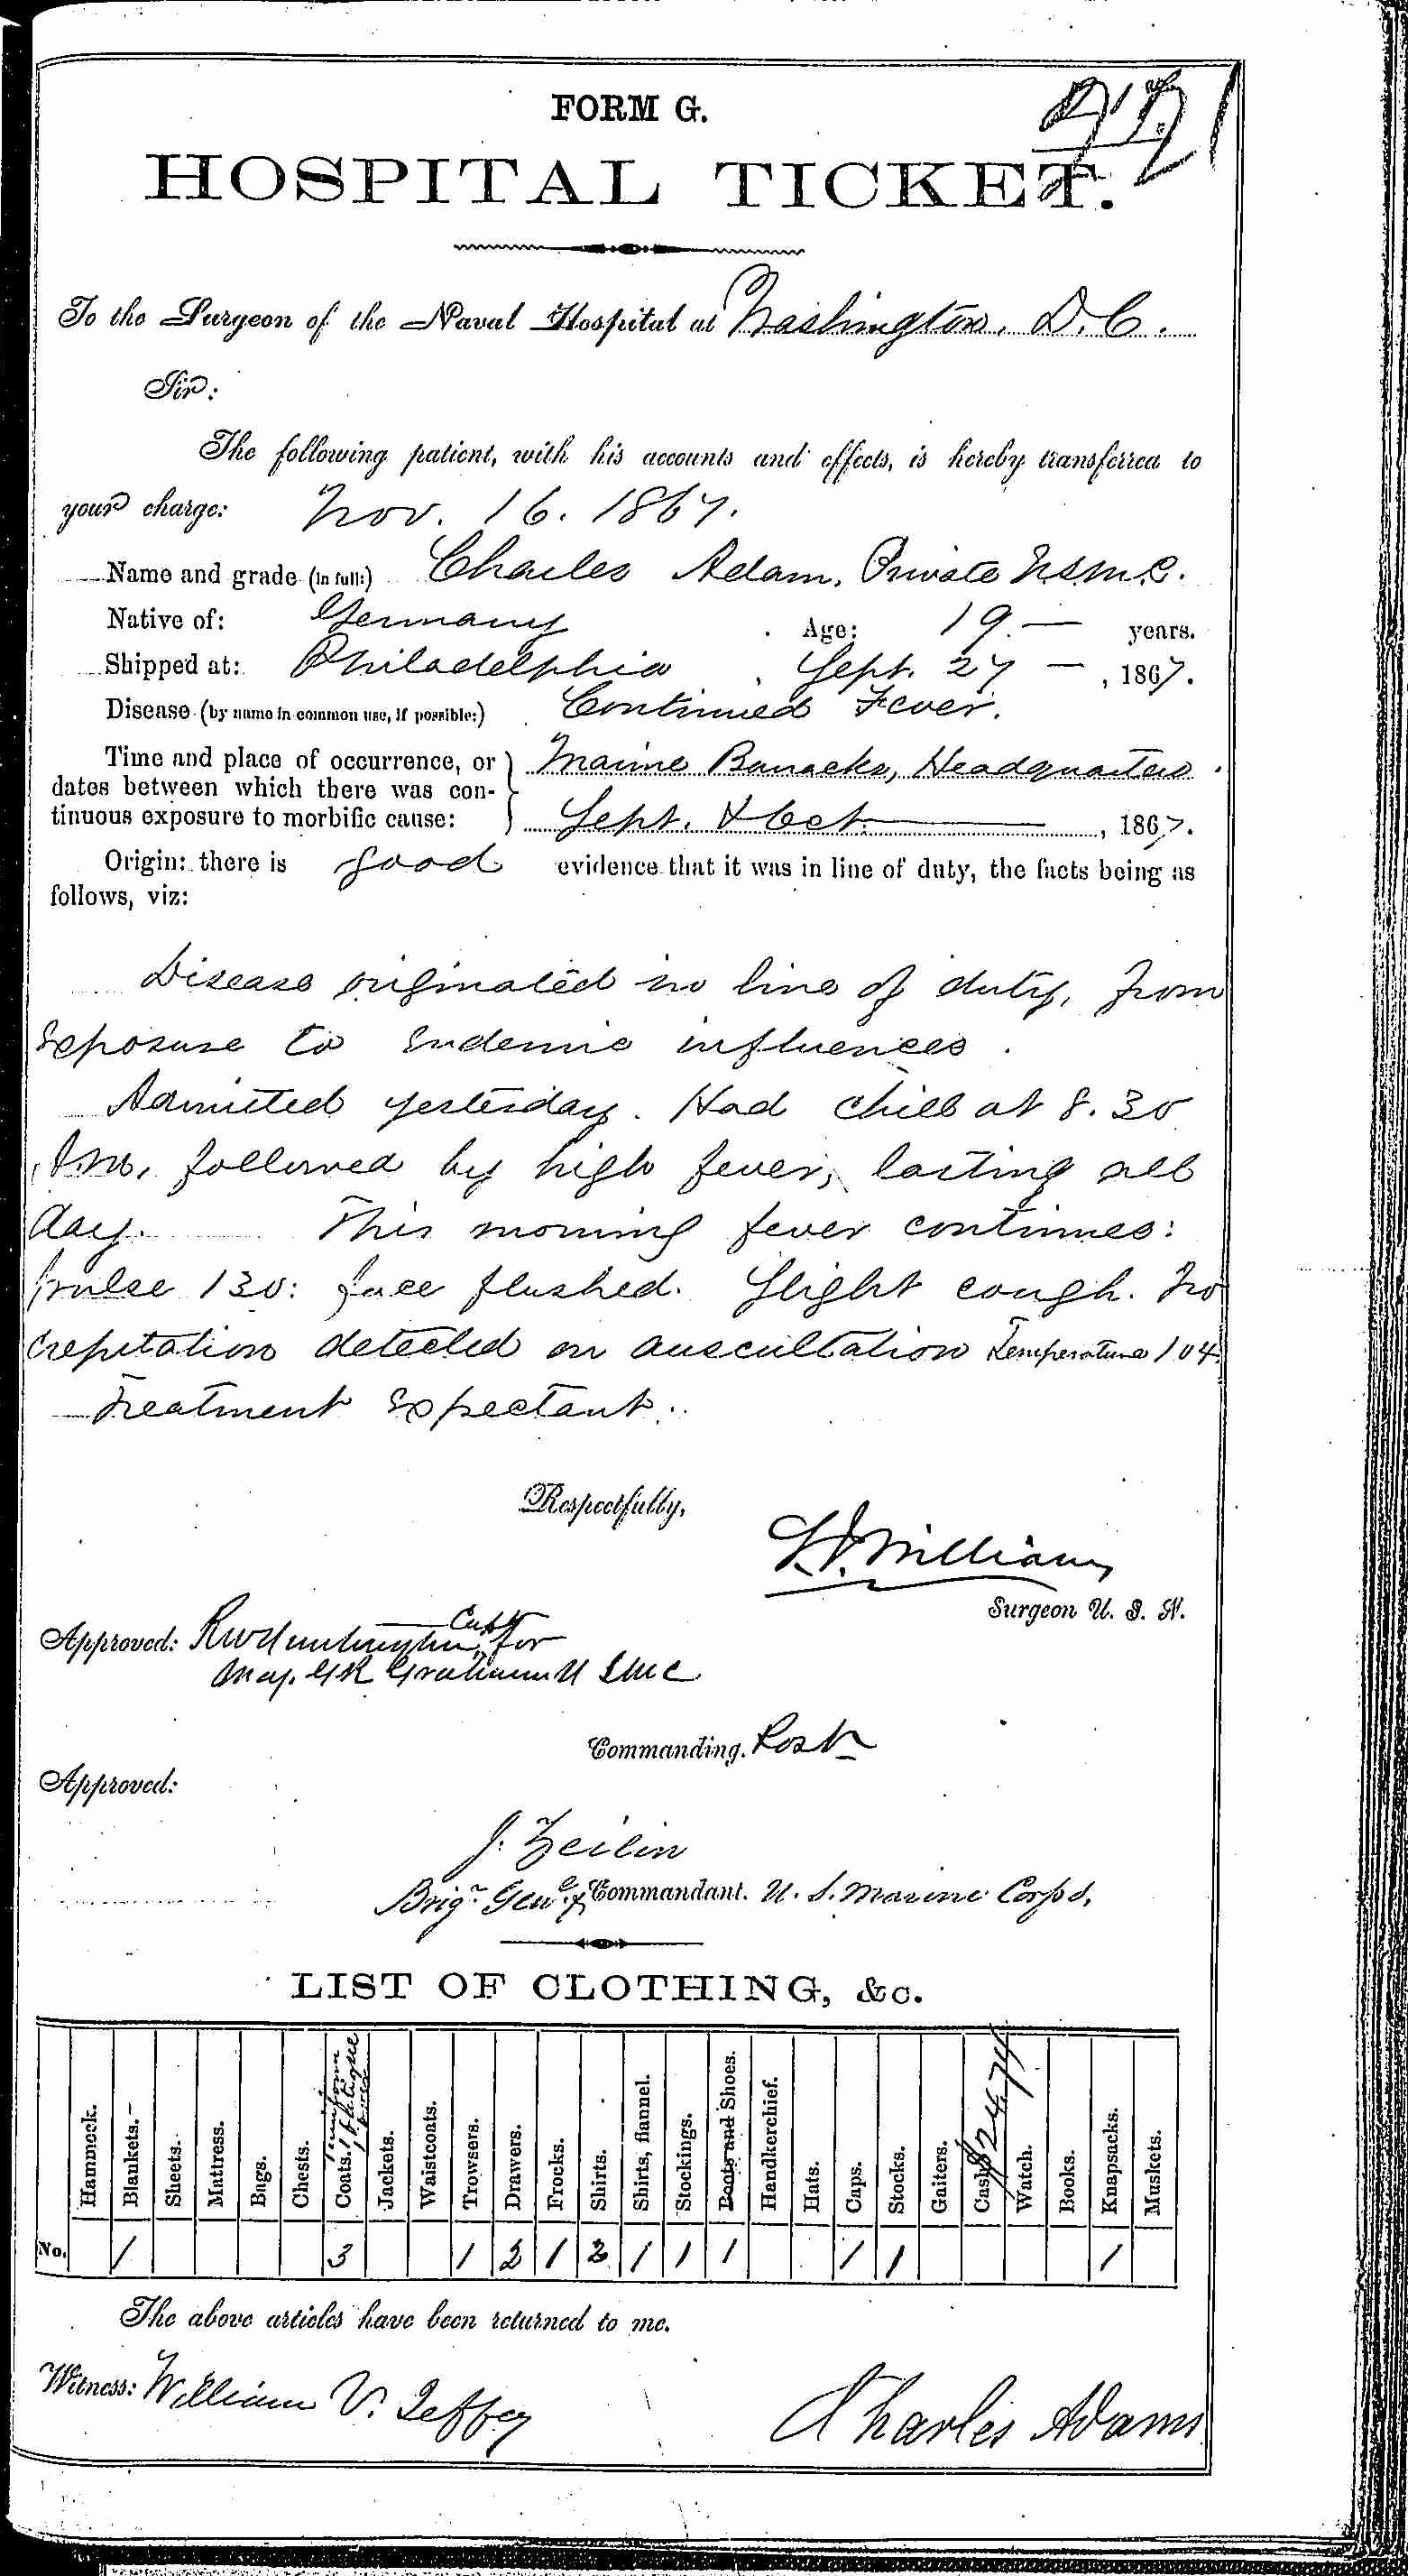 Entry for Charles Adams (page 1 of 2) in the log Hospital Tickets and Case Papers - Naval Hospital - Washington, D.C. - 1866-68